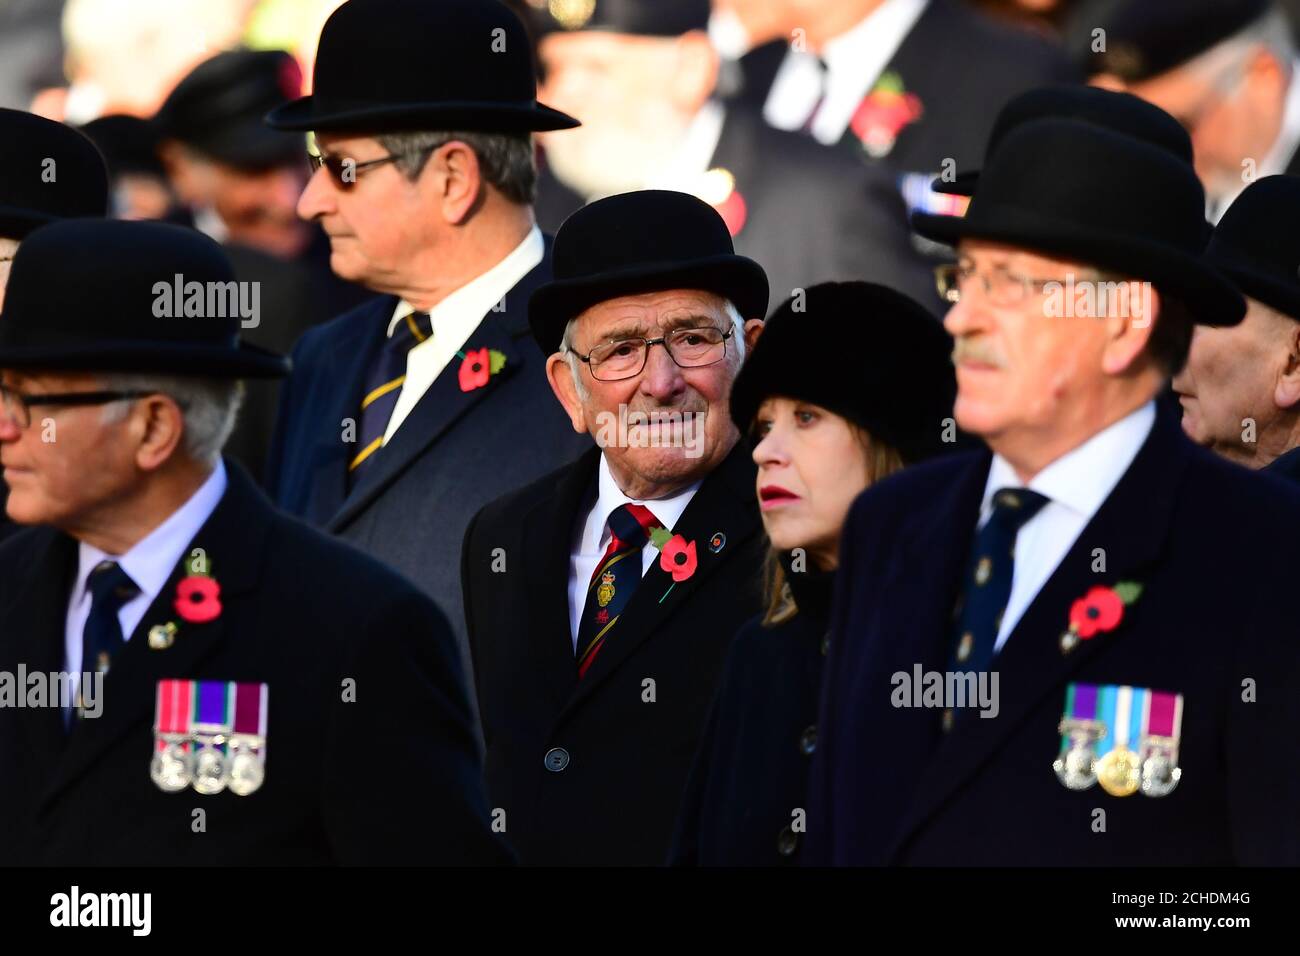 Veterans attend the remembrance service at the Cenotaph memorial in Whitehall, central London, on the 100th anniversary of the signing of the Armistice which marked the end of the First World War. Stock Photo